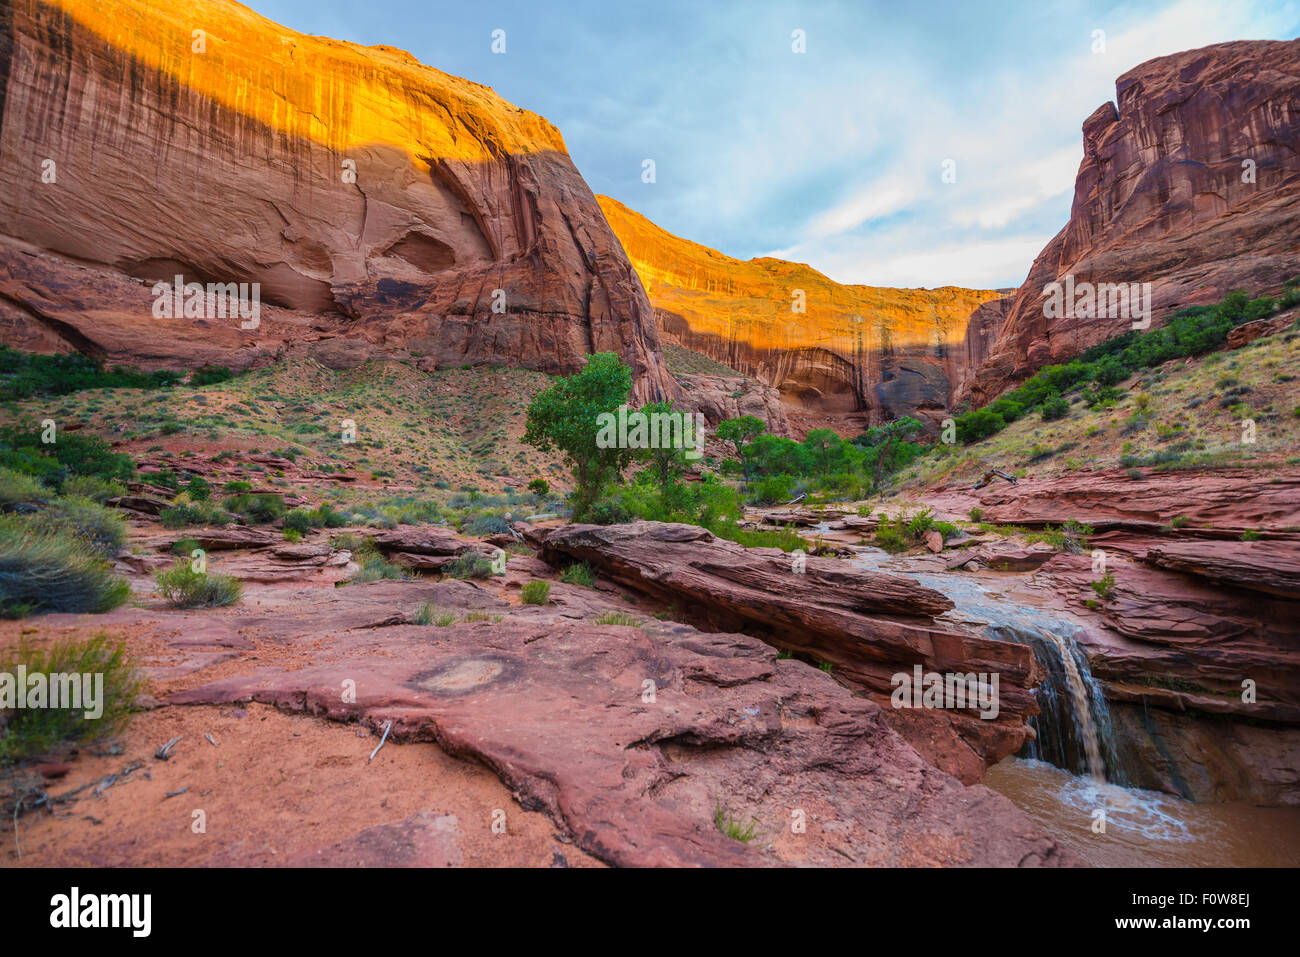 Stock Photo - Waterfall in Coyote Gulch part of Grand Staircase Escalante National Monument in southern Utah canyon country Stock Photo